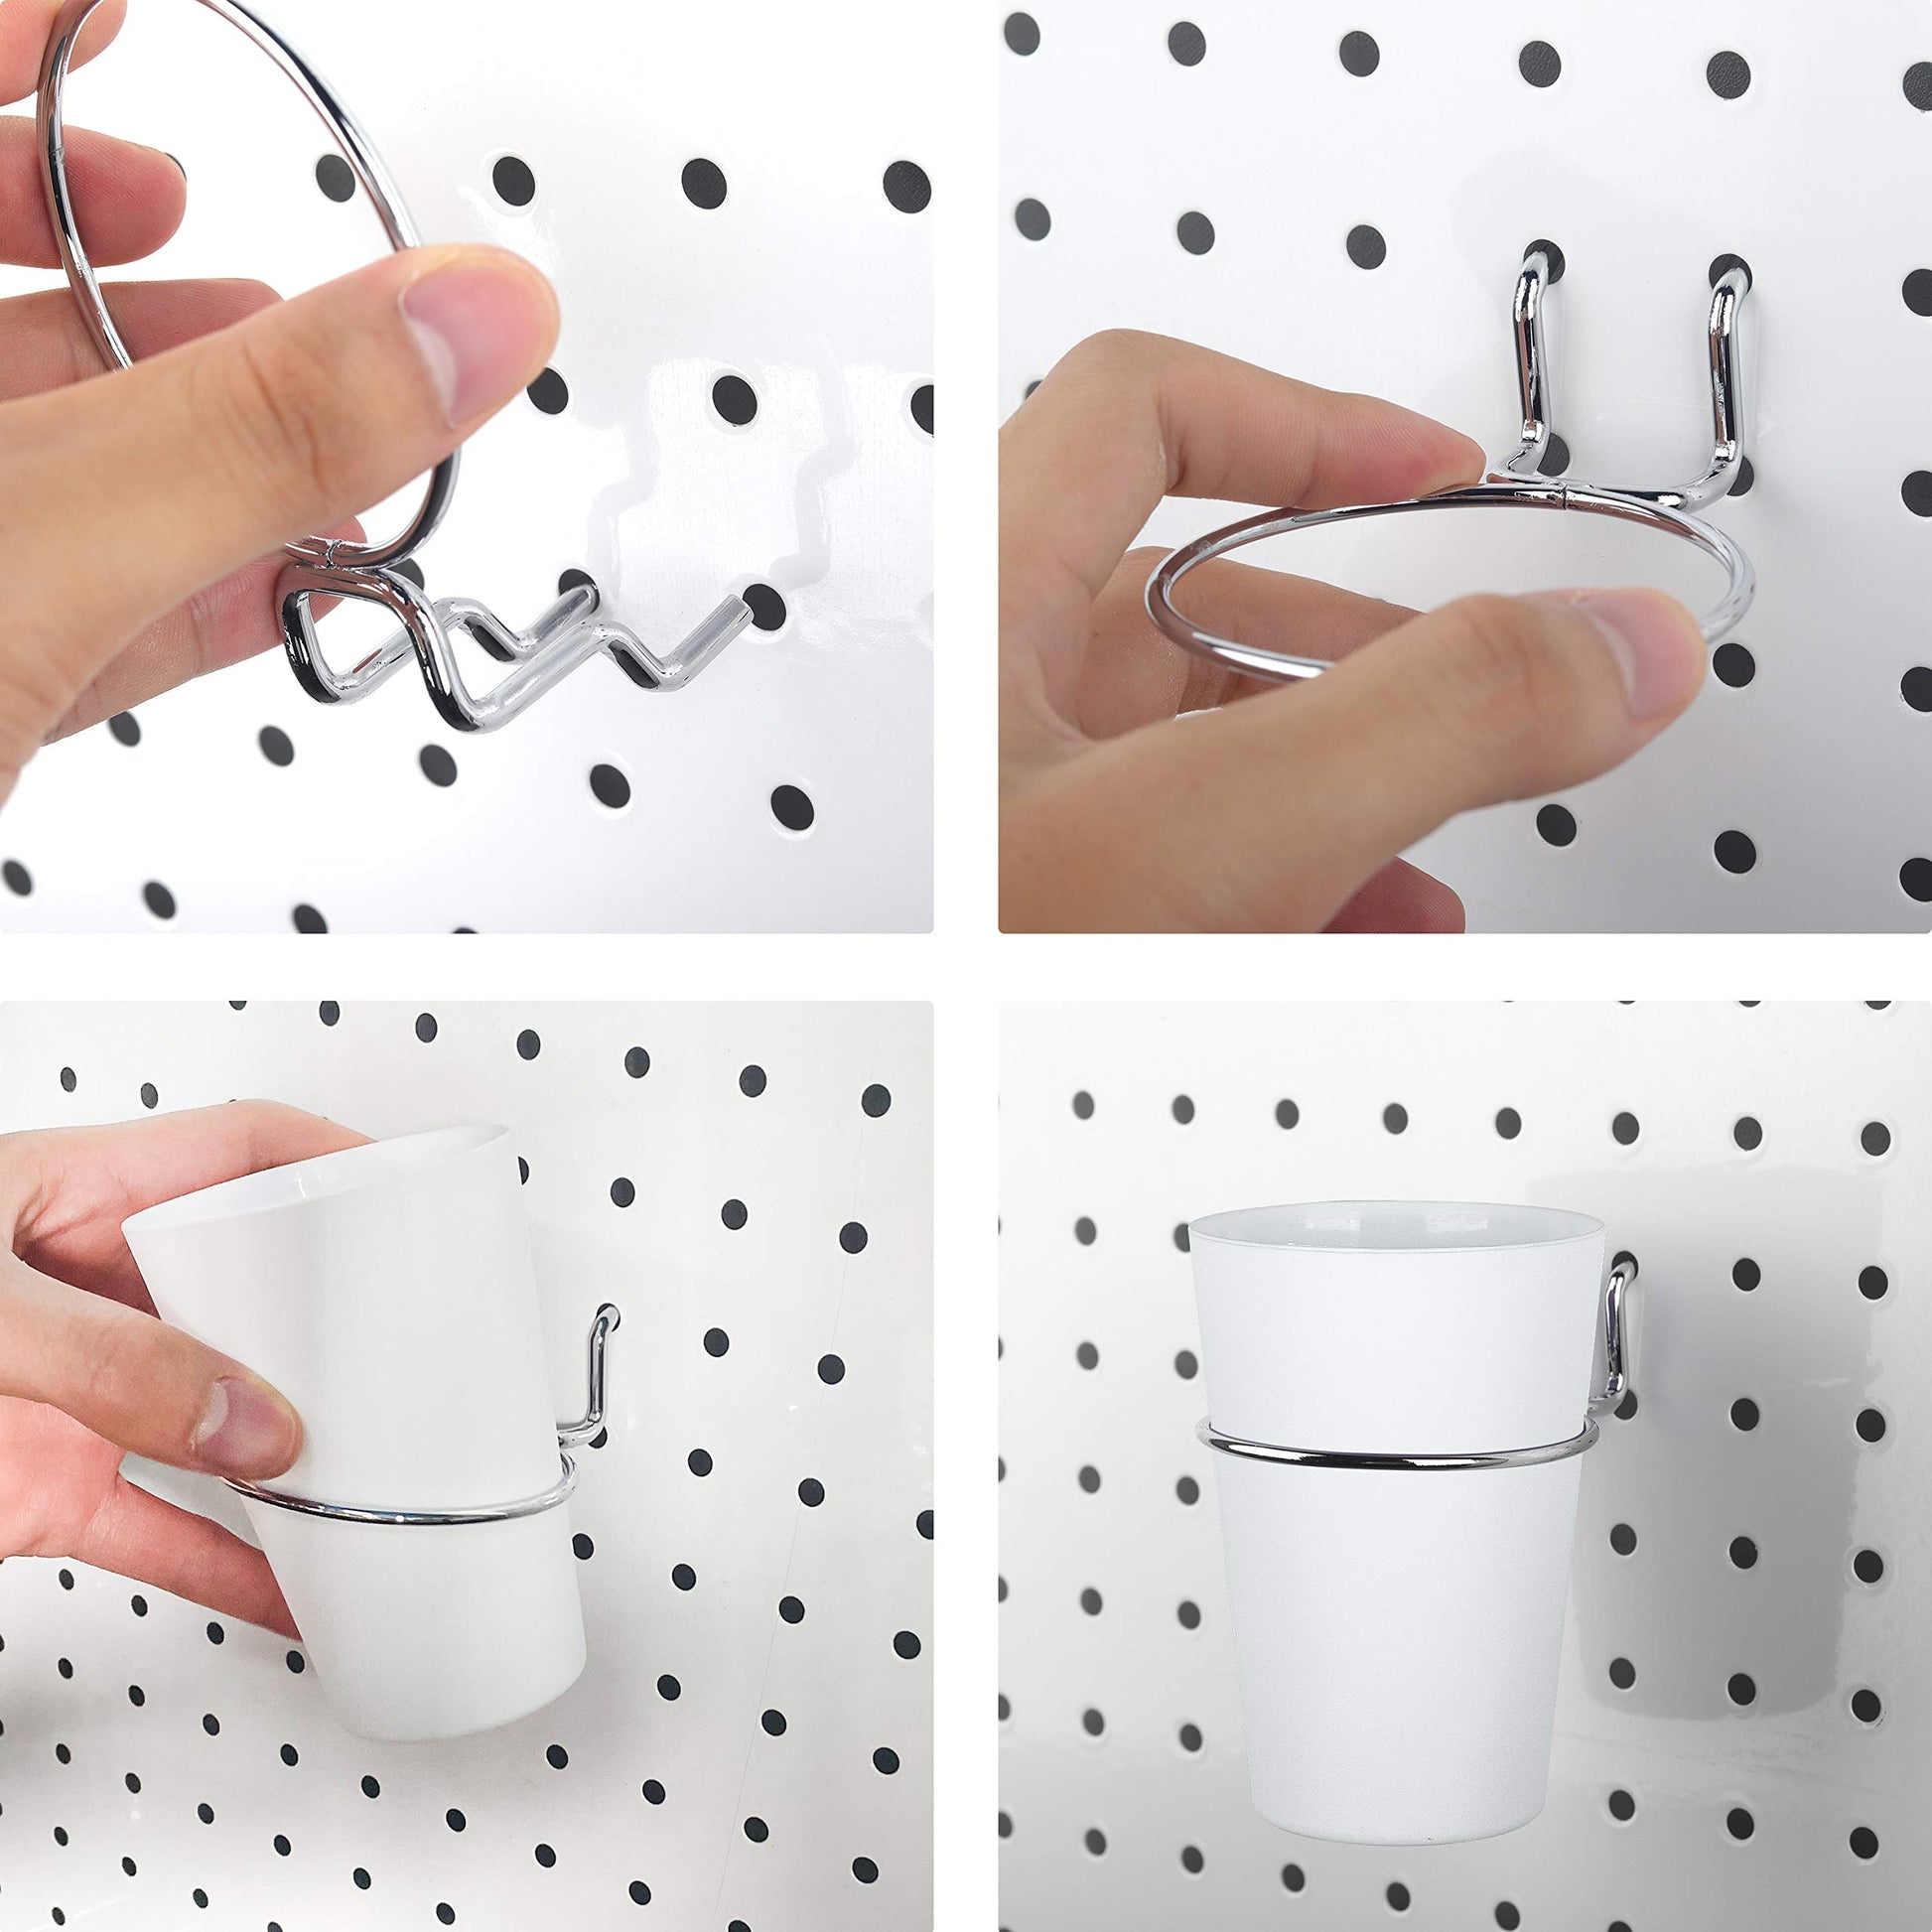 Kuhome 6 Sets Pegboard Hooks with Pegboard Cups Ring Style Pegboard Bins with Rings Pegboard Cup Holder Accessories for Organizing Storage (White)